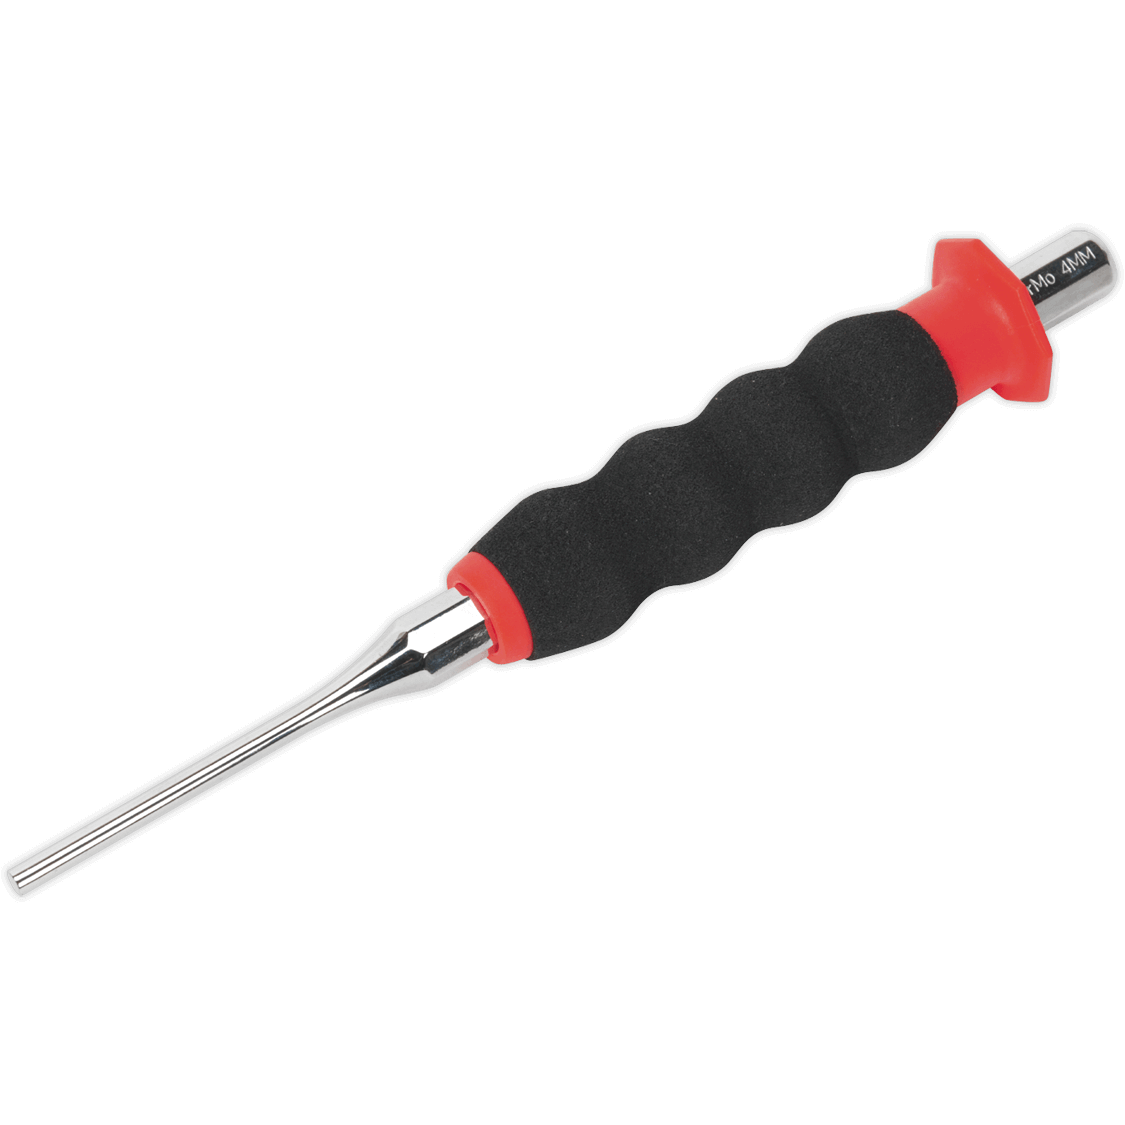 Photos - Other Hand Tools Sealey Sheathed Parallel Pin Punch 4mm AK91314 